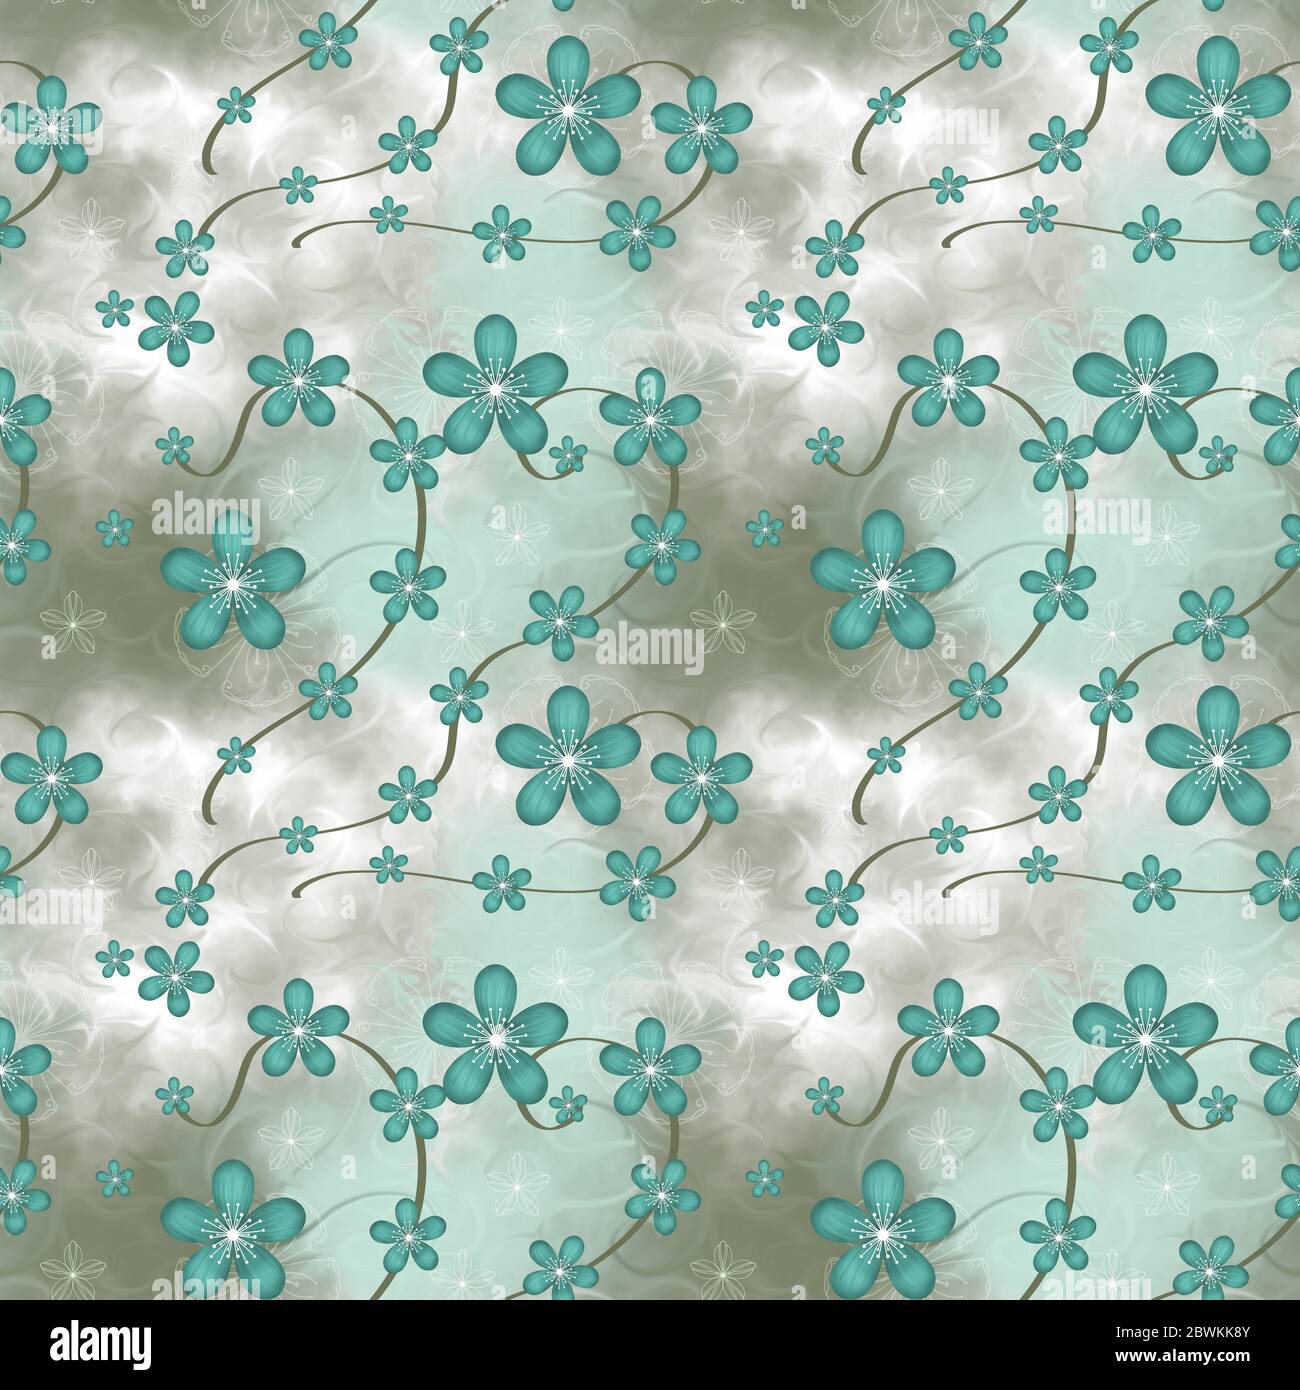 Seamless floral pattern in pastel colors. Seamless background. Seamless pattern with turquoise flowers. Stock Photo